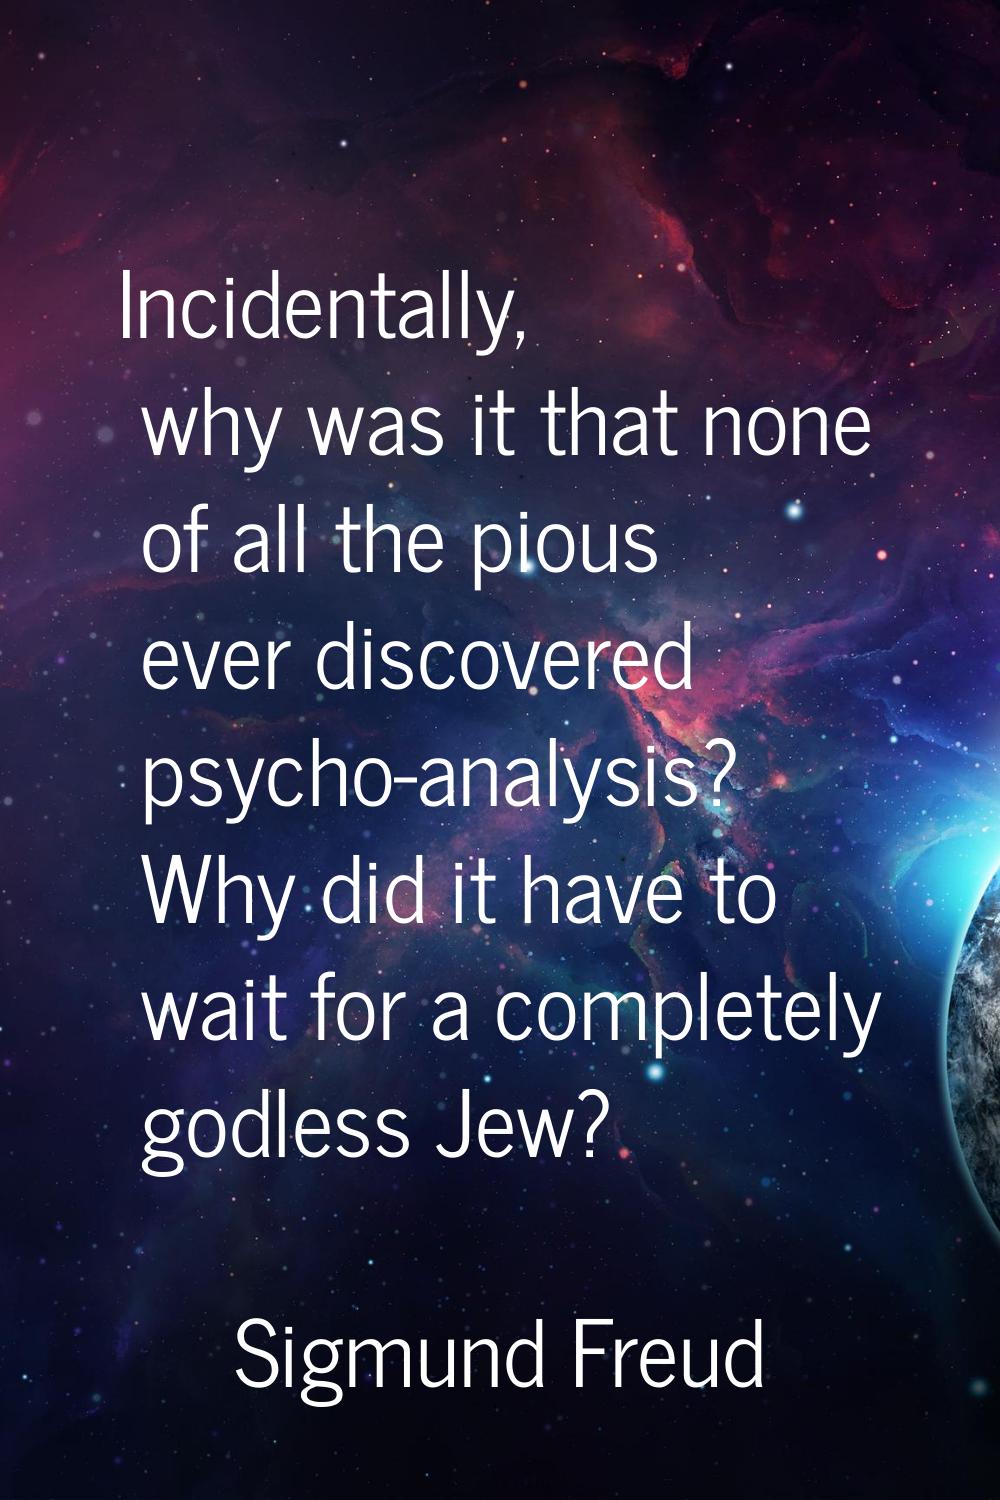 Incidentally, why was it that none of all the pious ever discovered psycho-analysis? Why did it hav